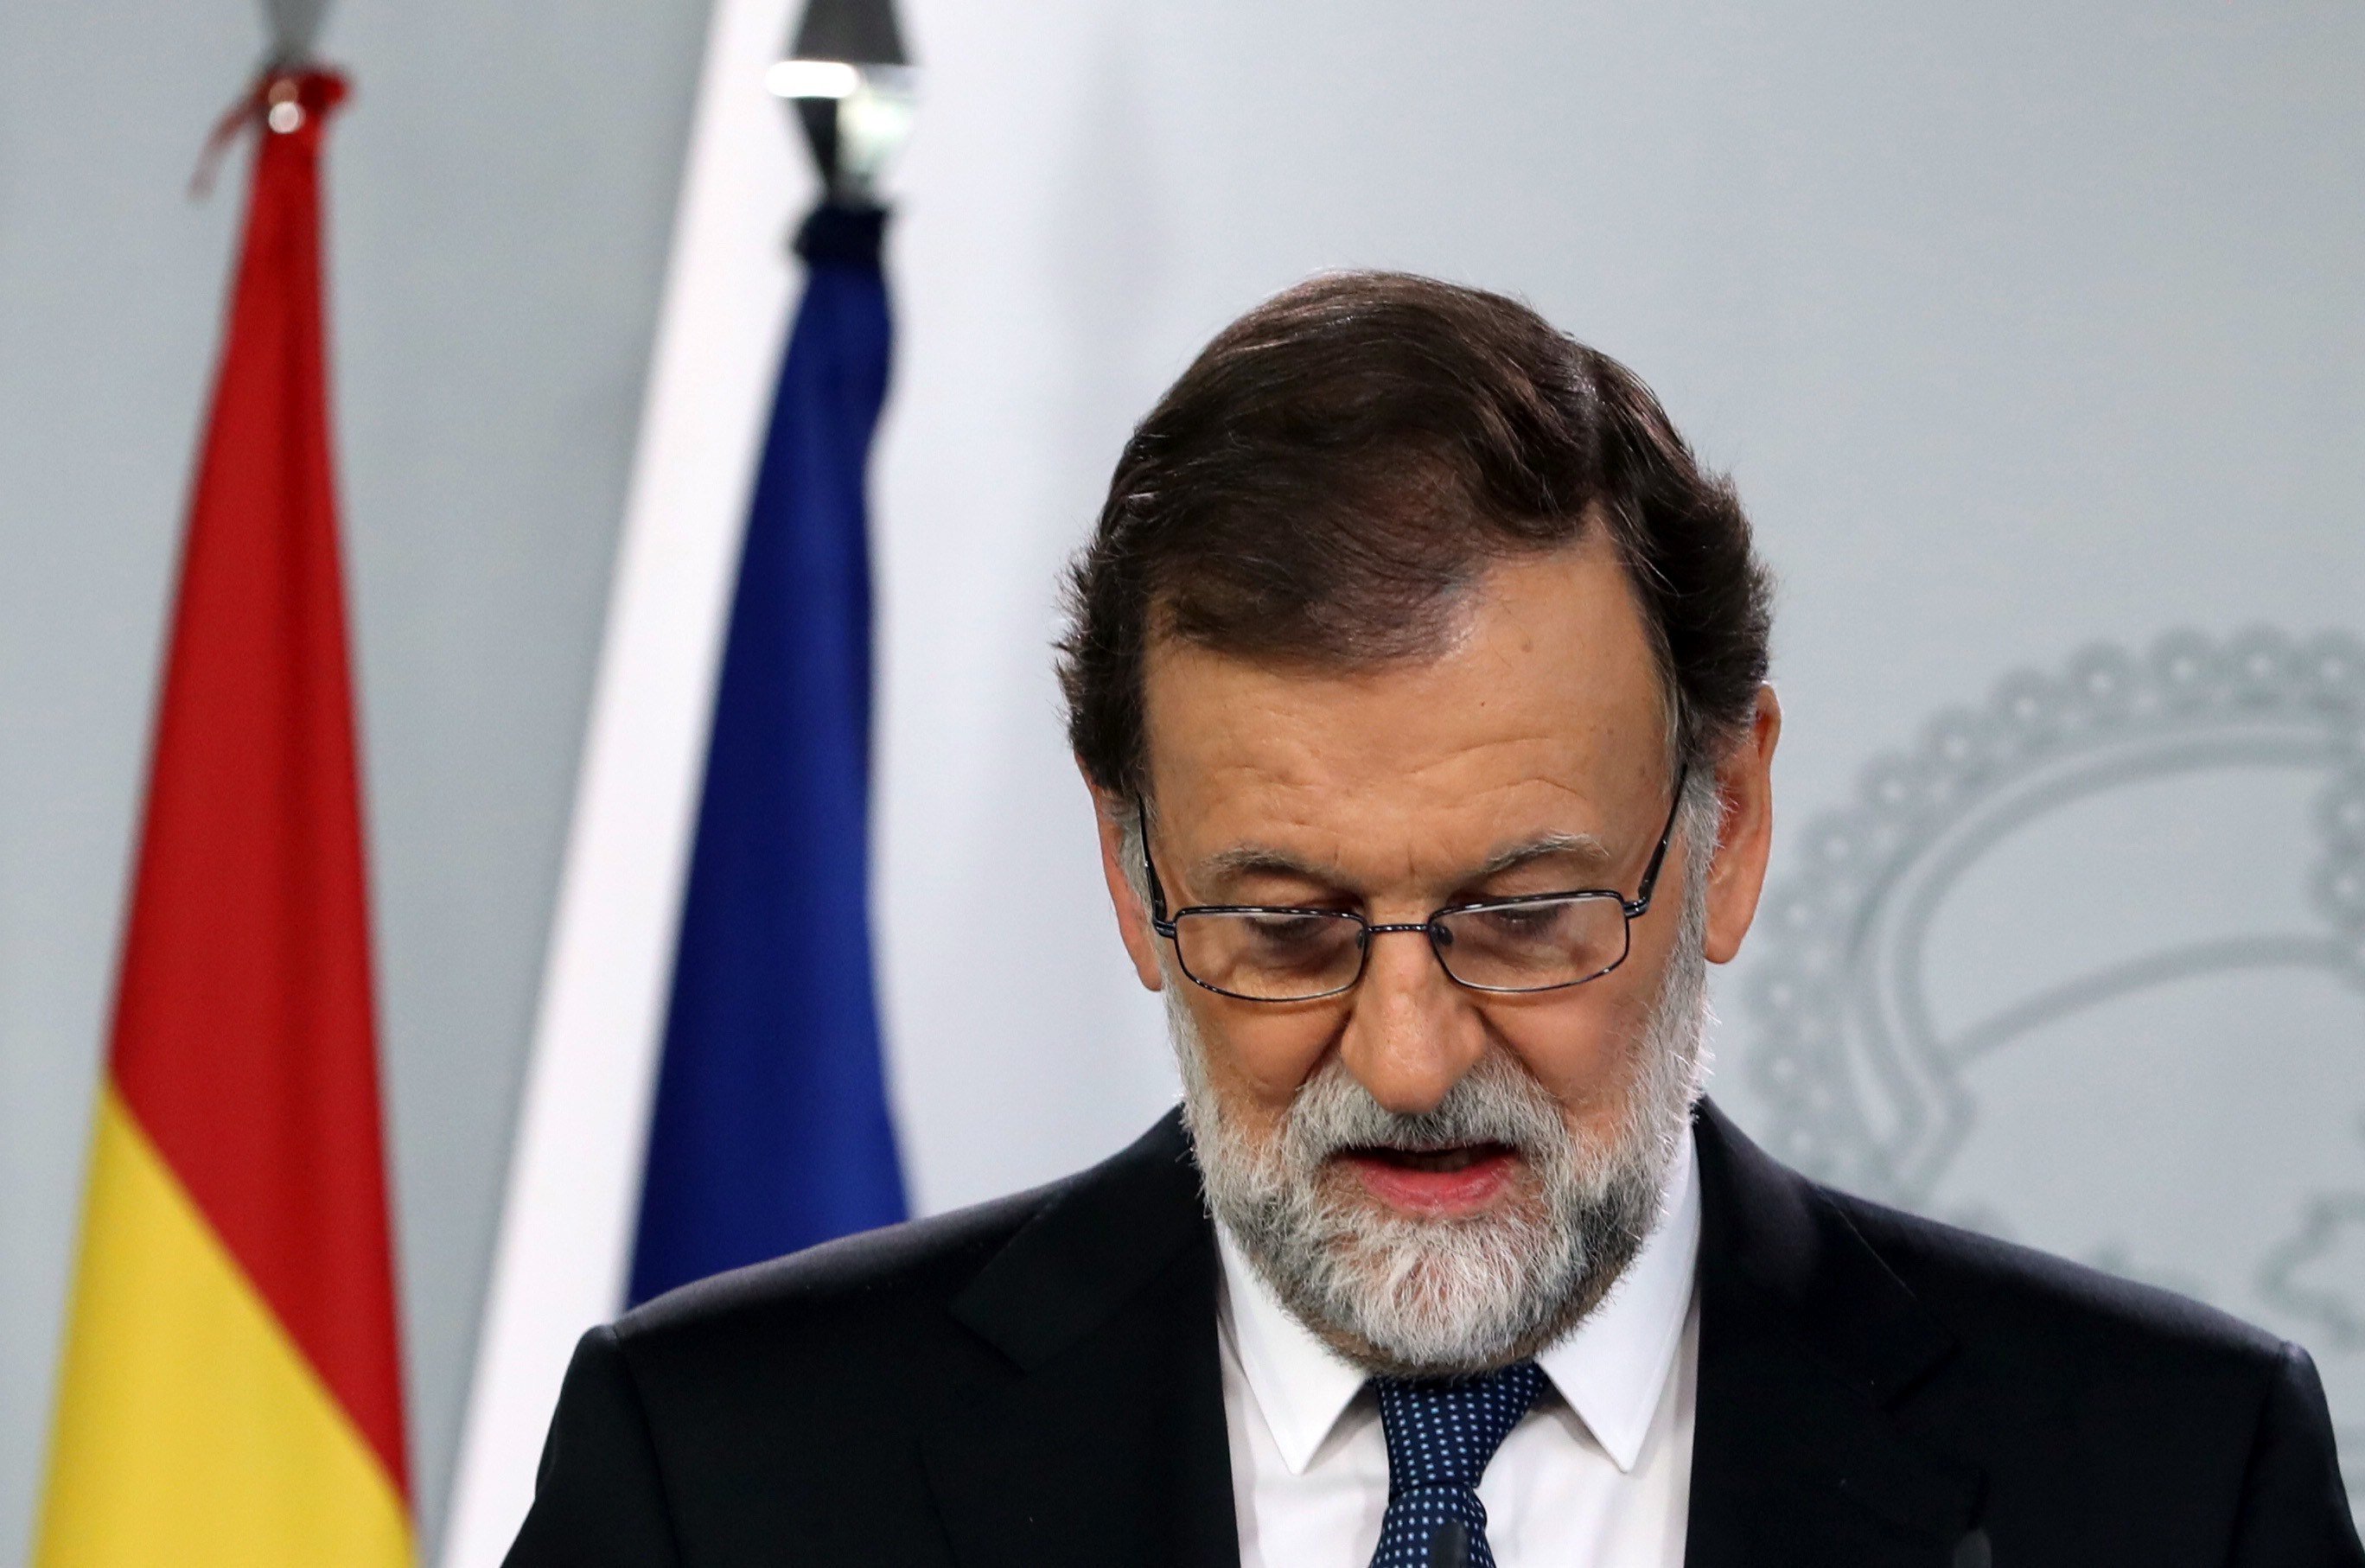 Spanish PM Mariano Rajoy rejects mediation proposal from Podemos' Pablo Iglesias